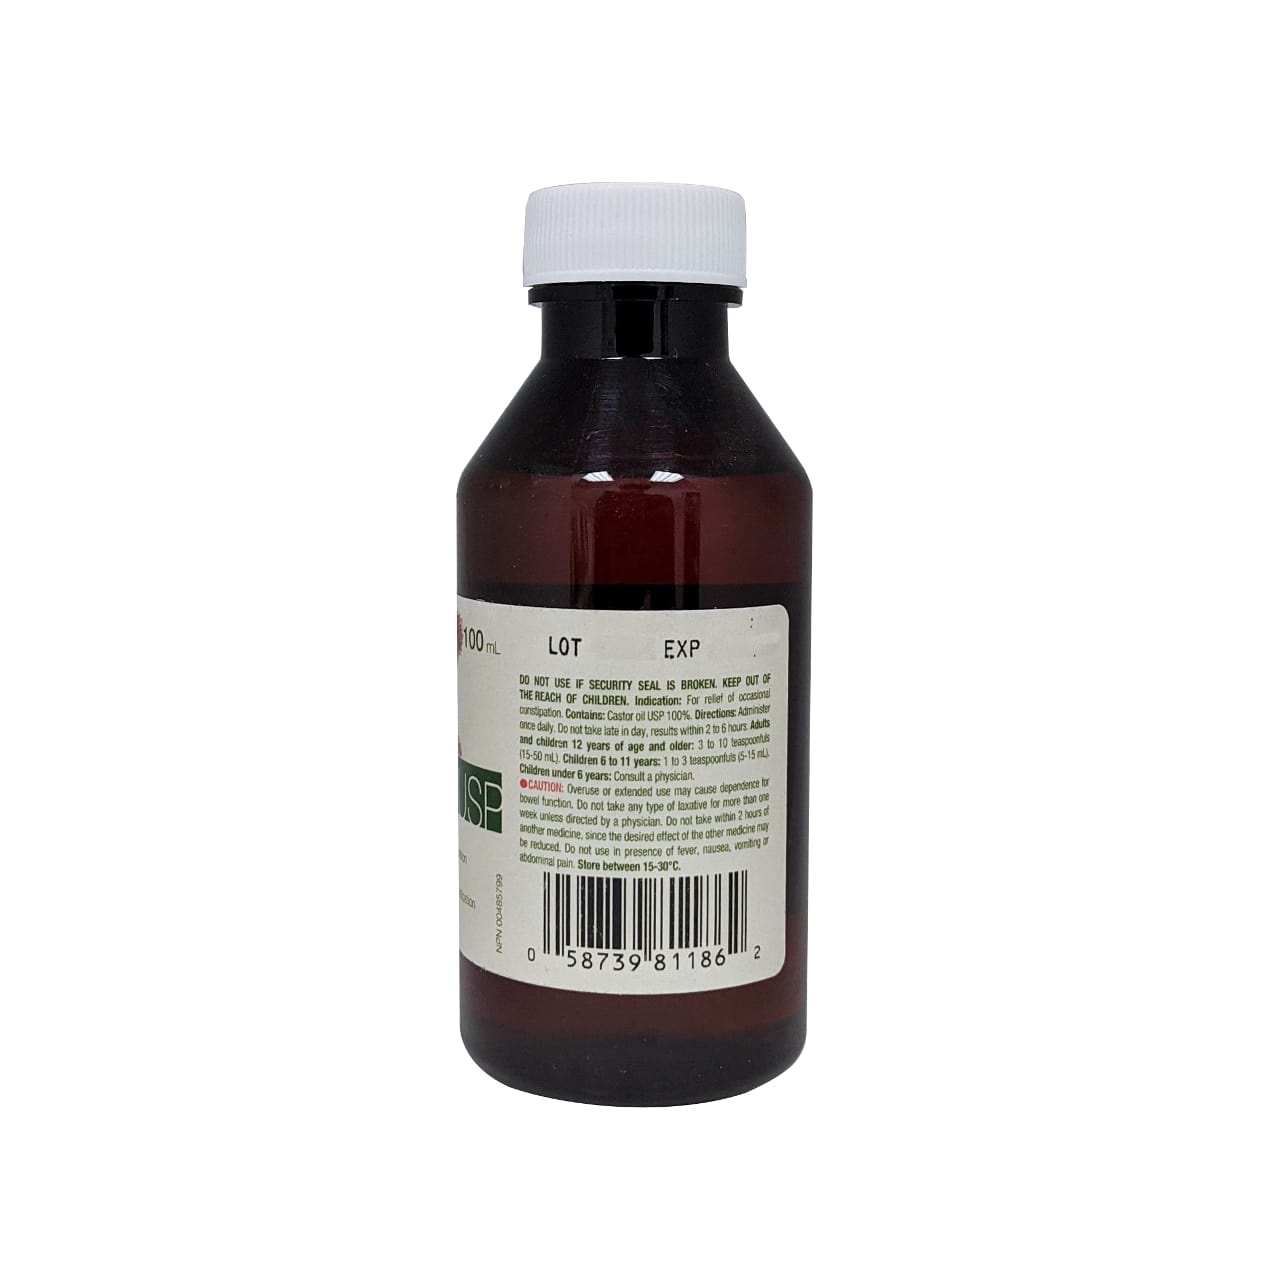 Indications, dose, ingredients, and caution for Rougier Pharma Castor Oil in English